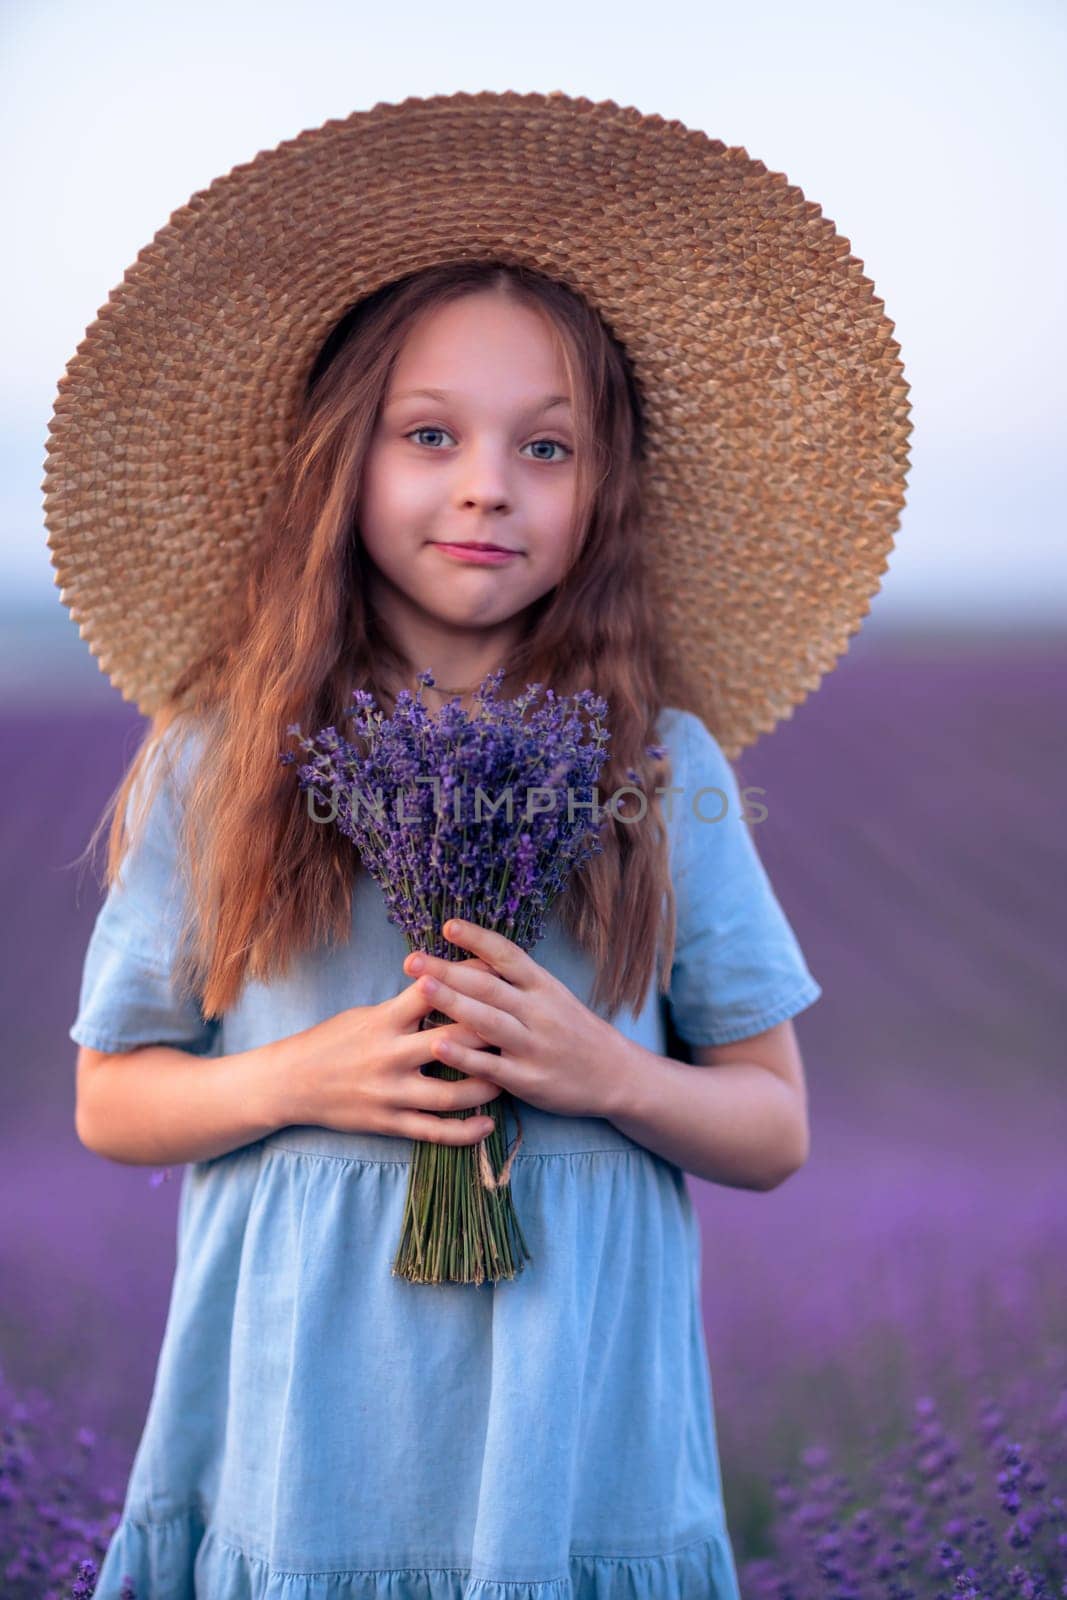 Girl lavender field in a blue dress with flowing hair in a hat stands in a lilac lavender field by Matiunina